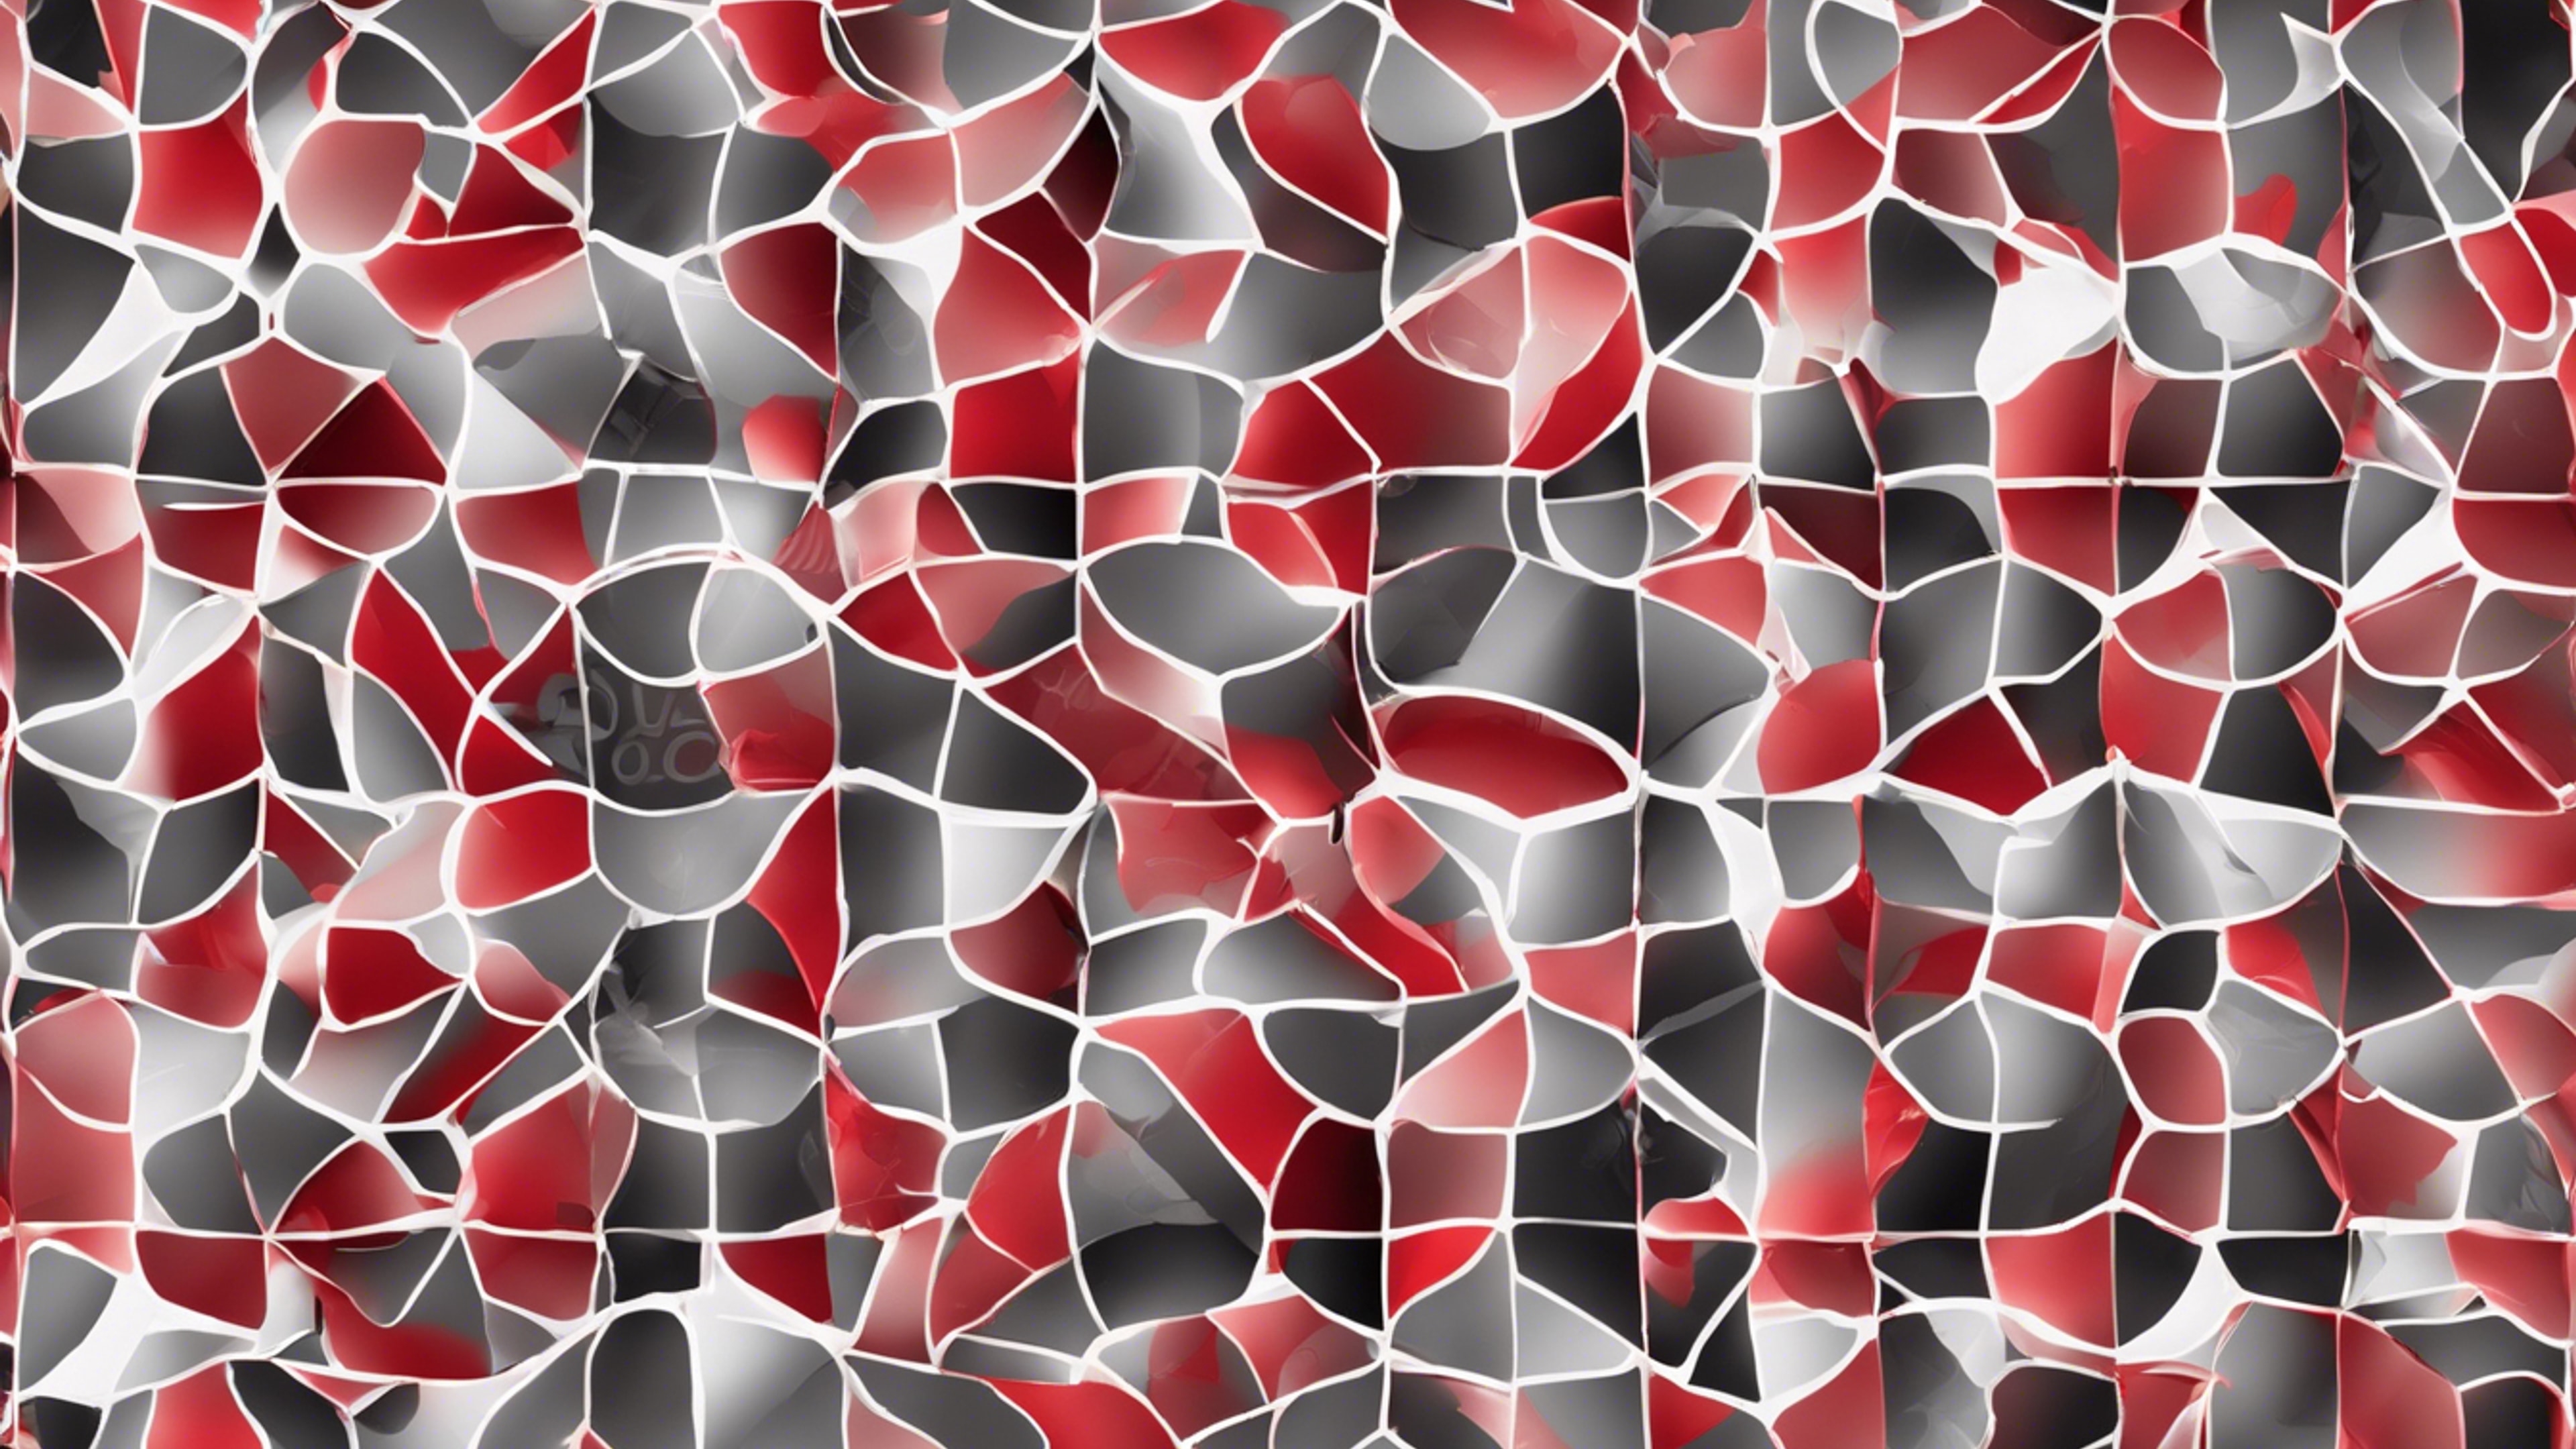 Design a geometric seamless pattern with each shape filled with red and grey gradients.壁紙[79f3f0ca5e424e038592]